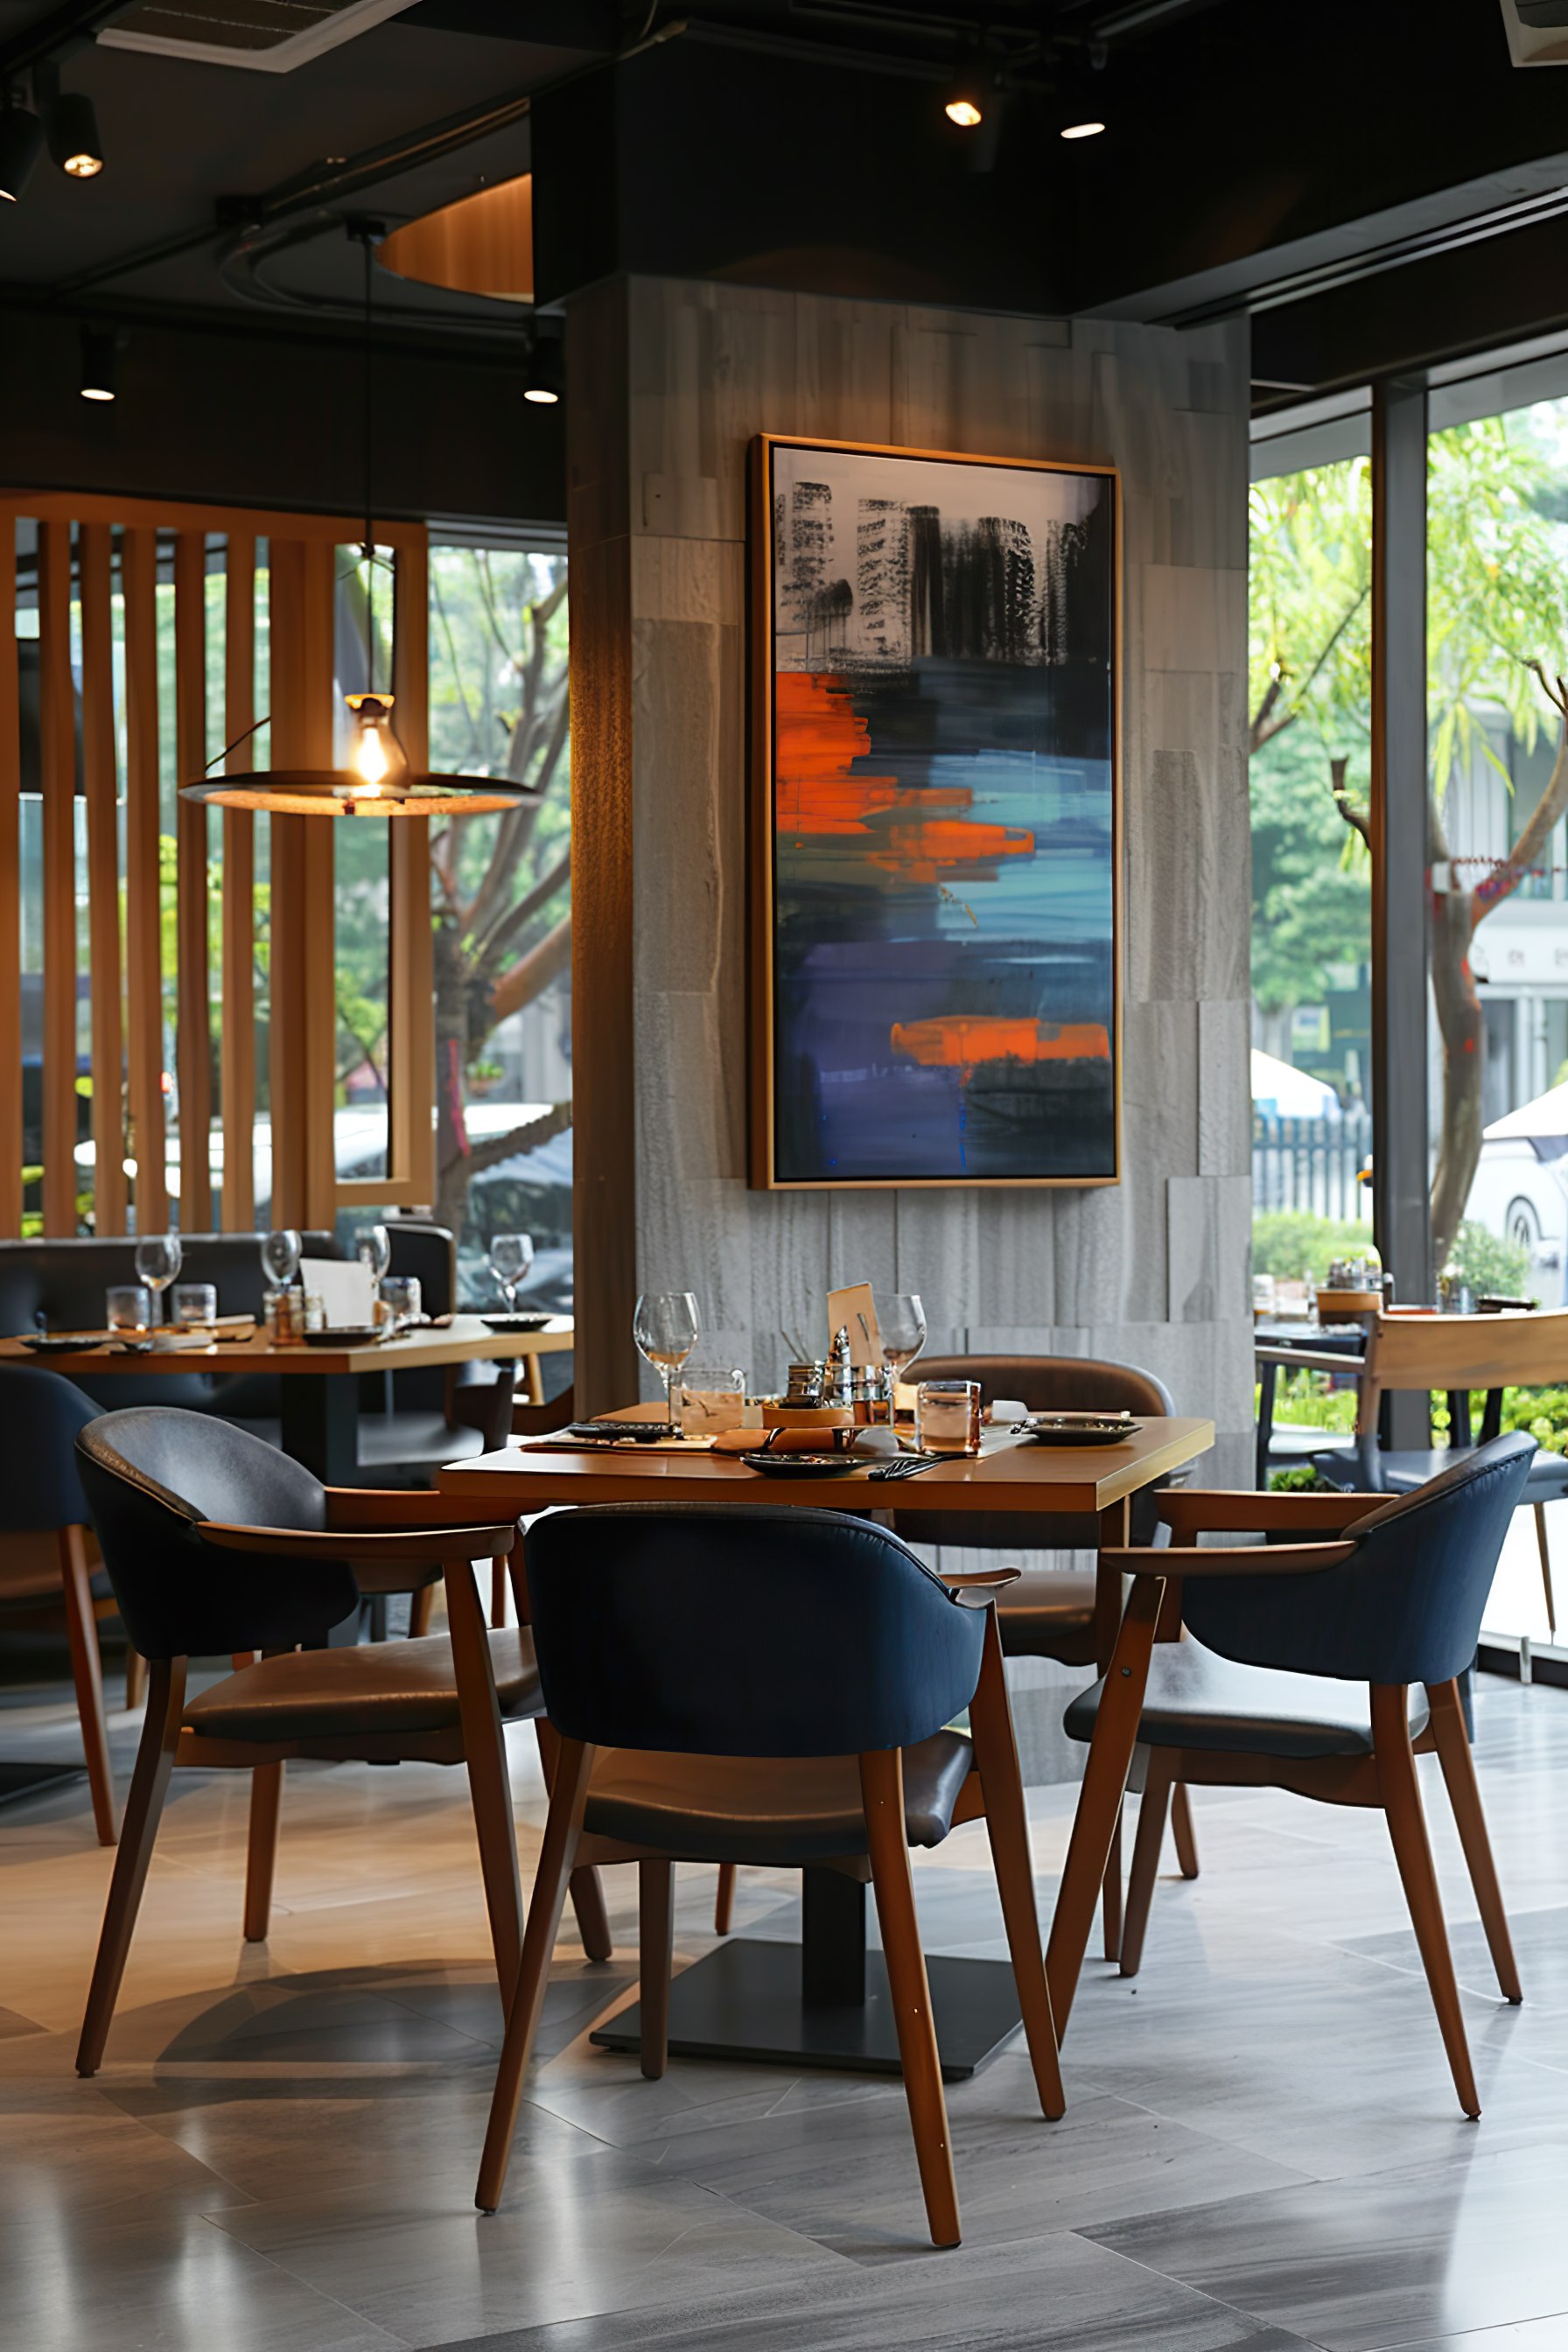 Elegant dining setup with modern wooden tables and chairs, decorative lighting, and colorful artwork on the wall in a restaurant interior.